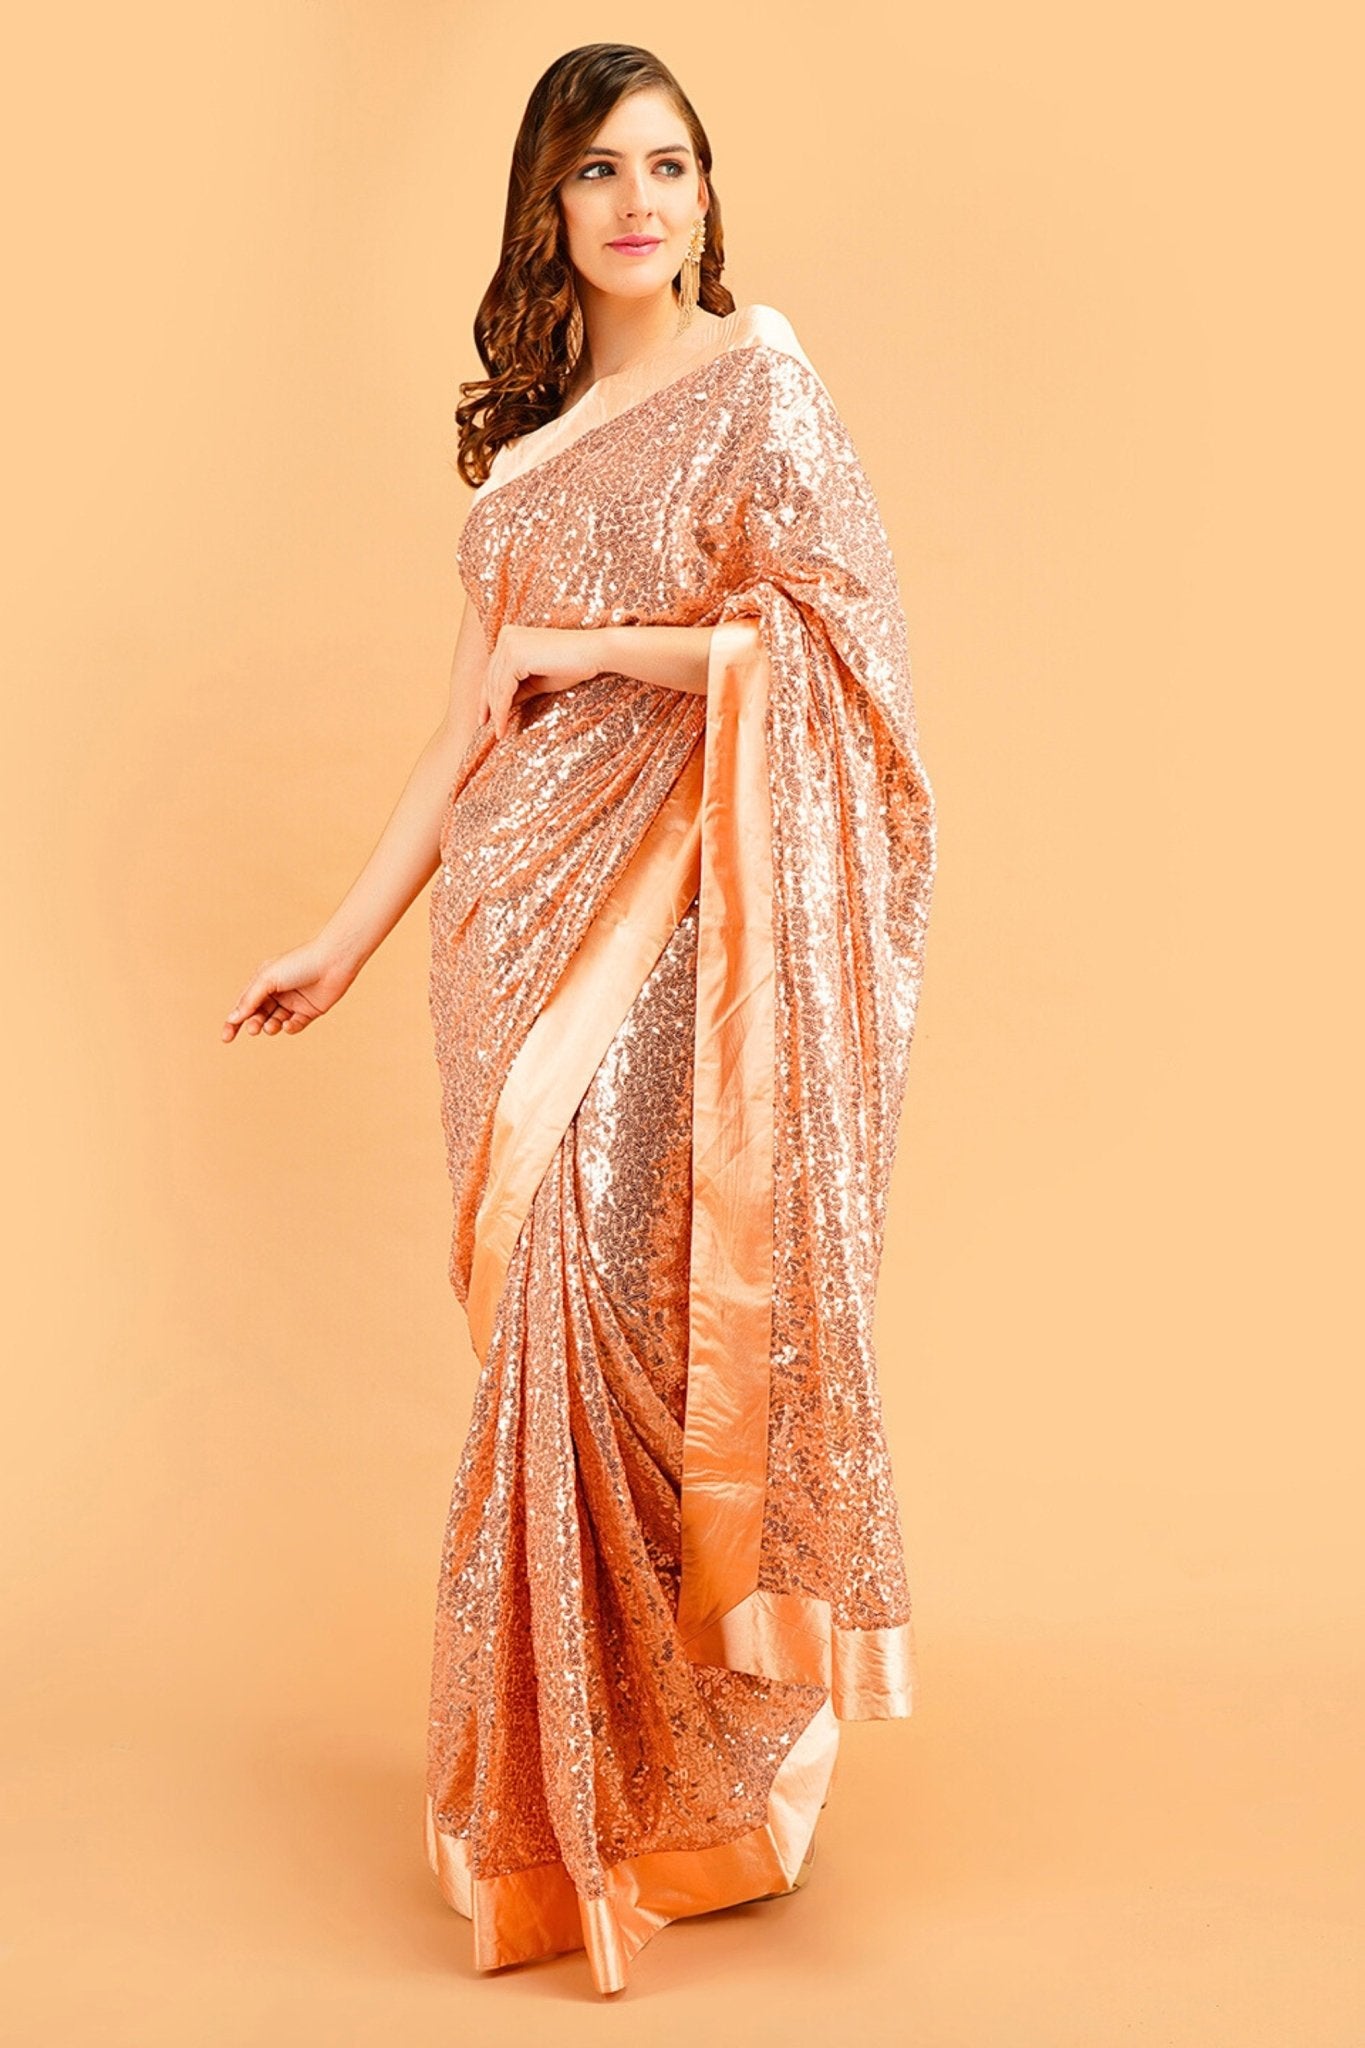 Ombre Peach Georgette Sequin Saree with Hand Embroidery Border